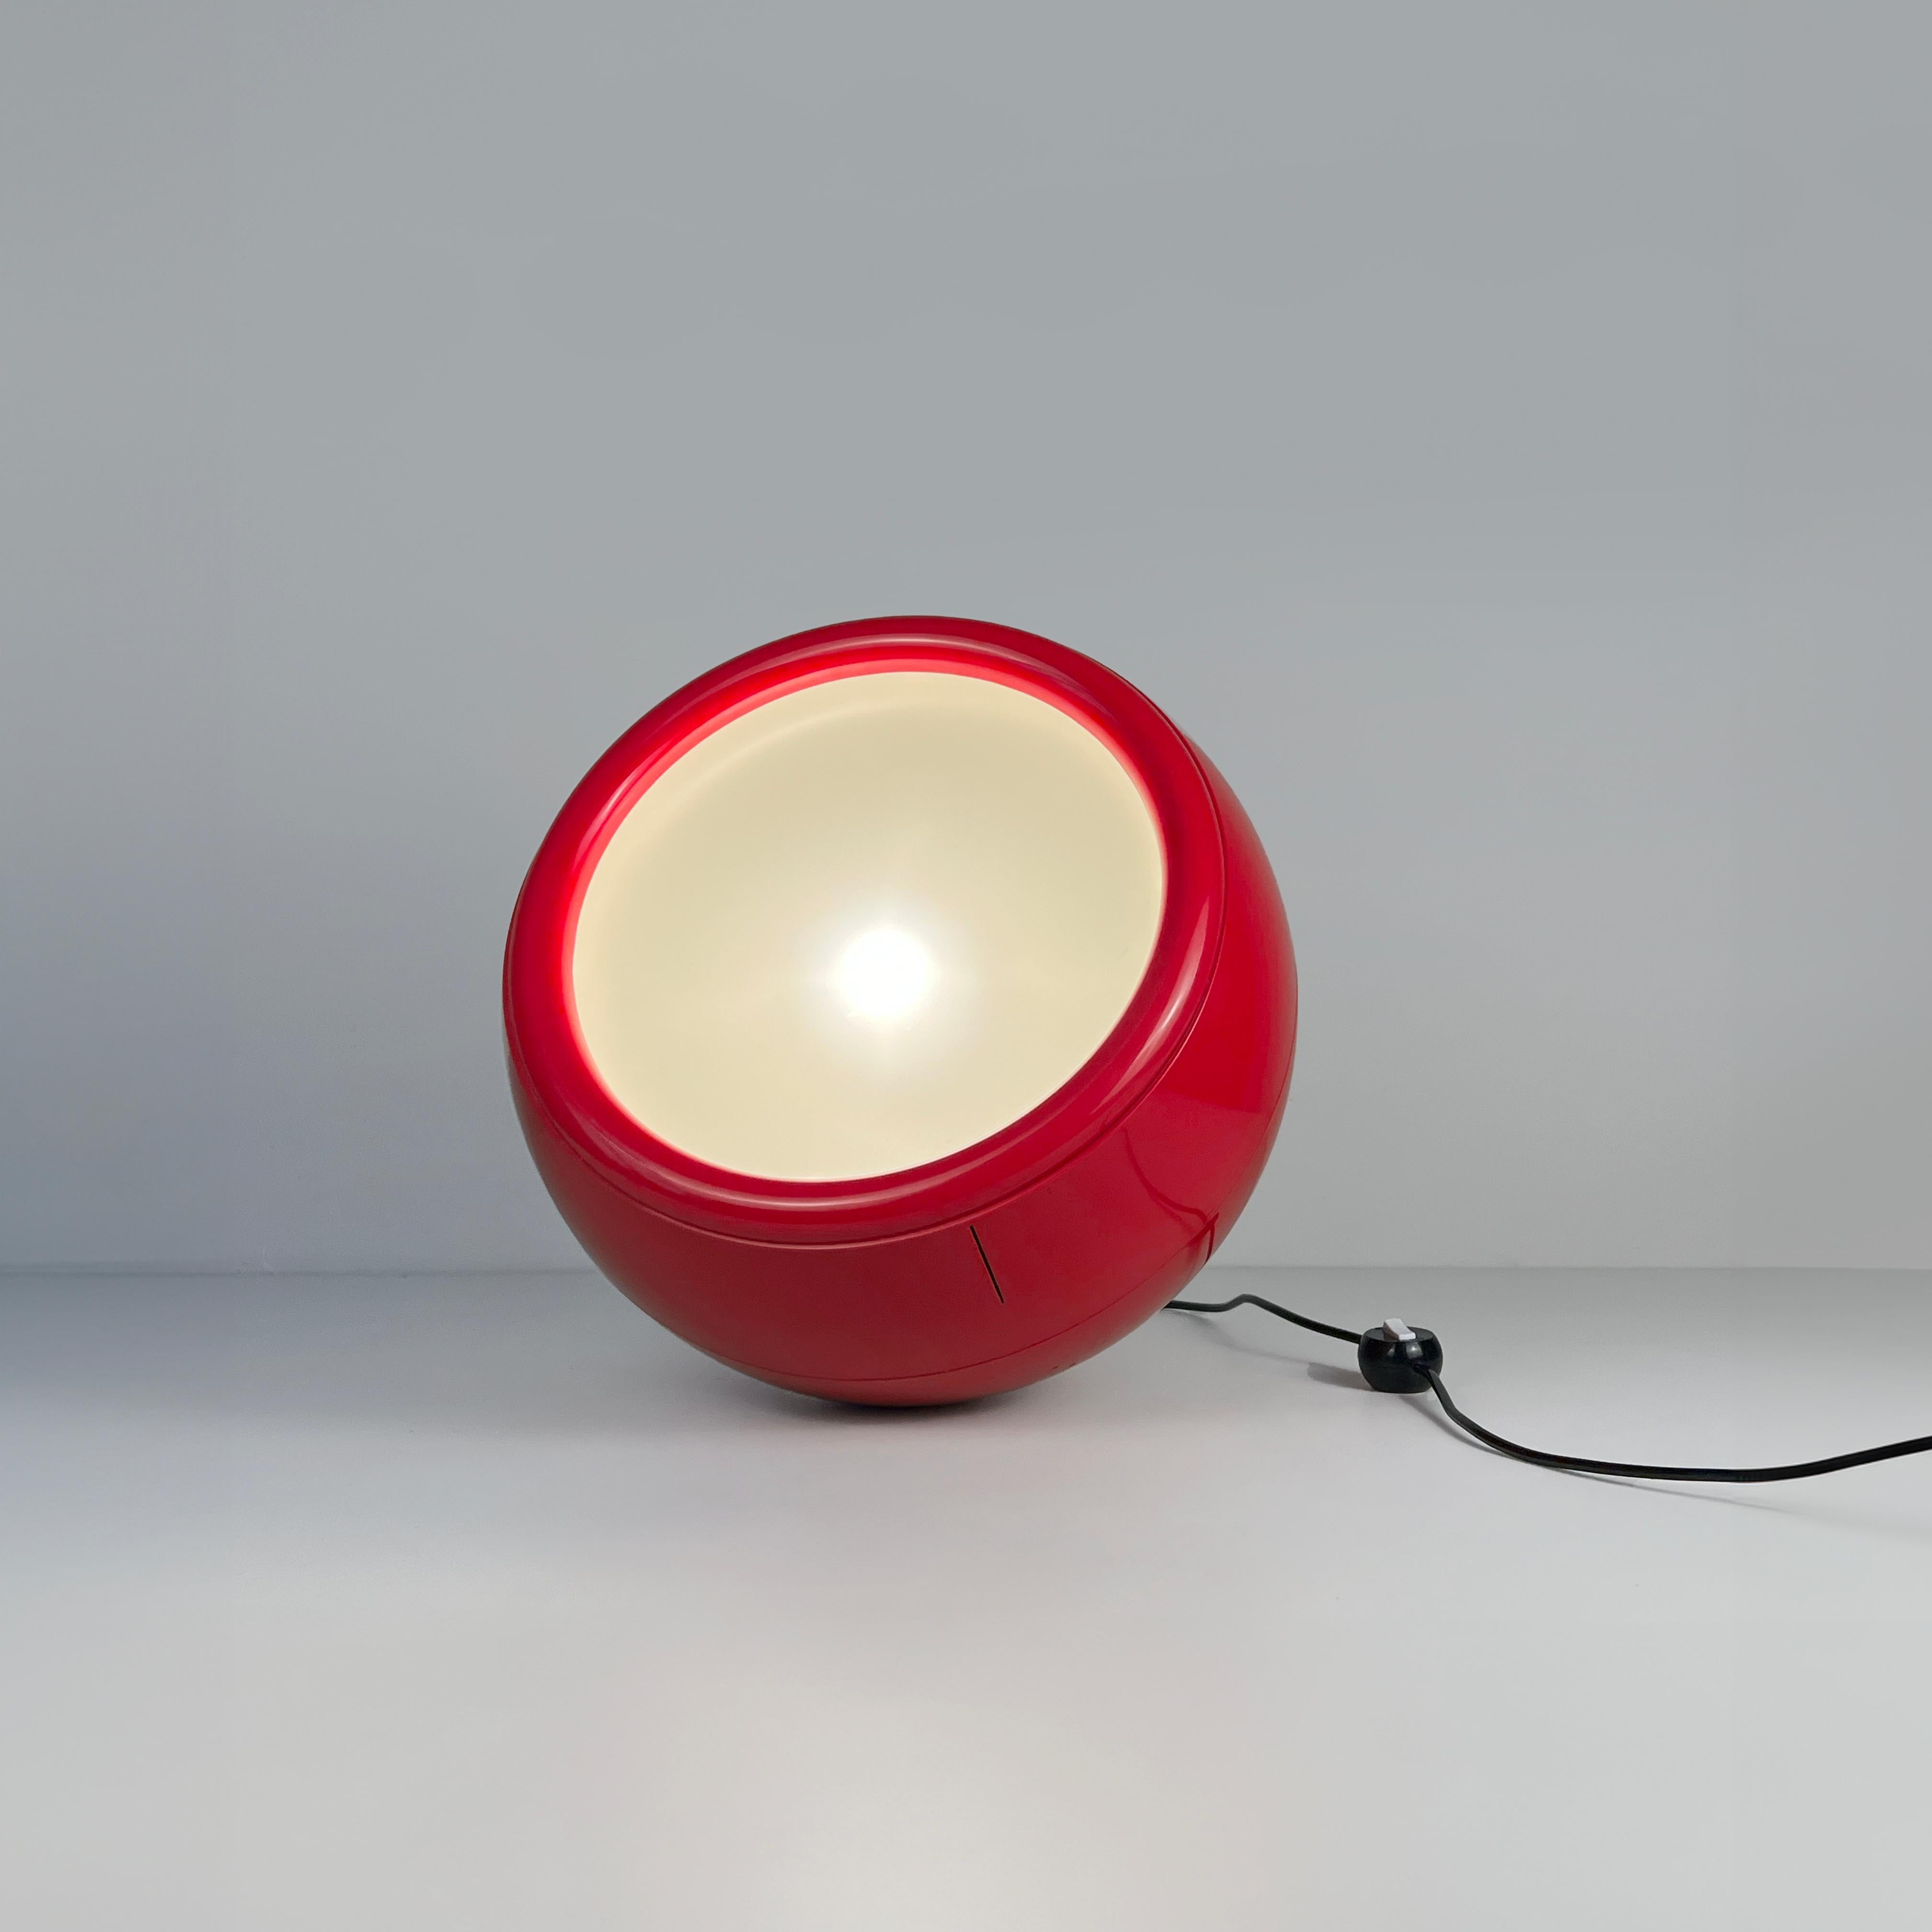 Red Pallade (1st Ed. 1968) floor lamp designed by Studio Tetrarch for Artemide For Sale 10